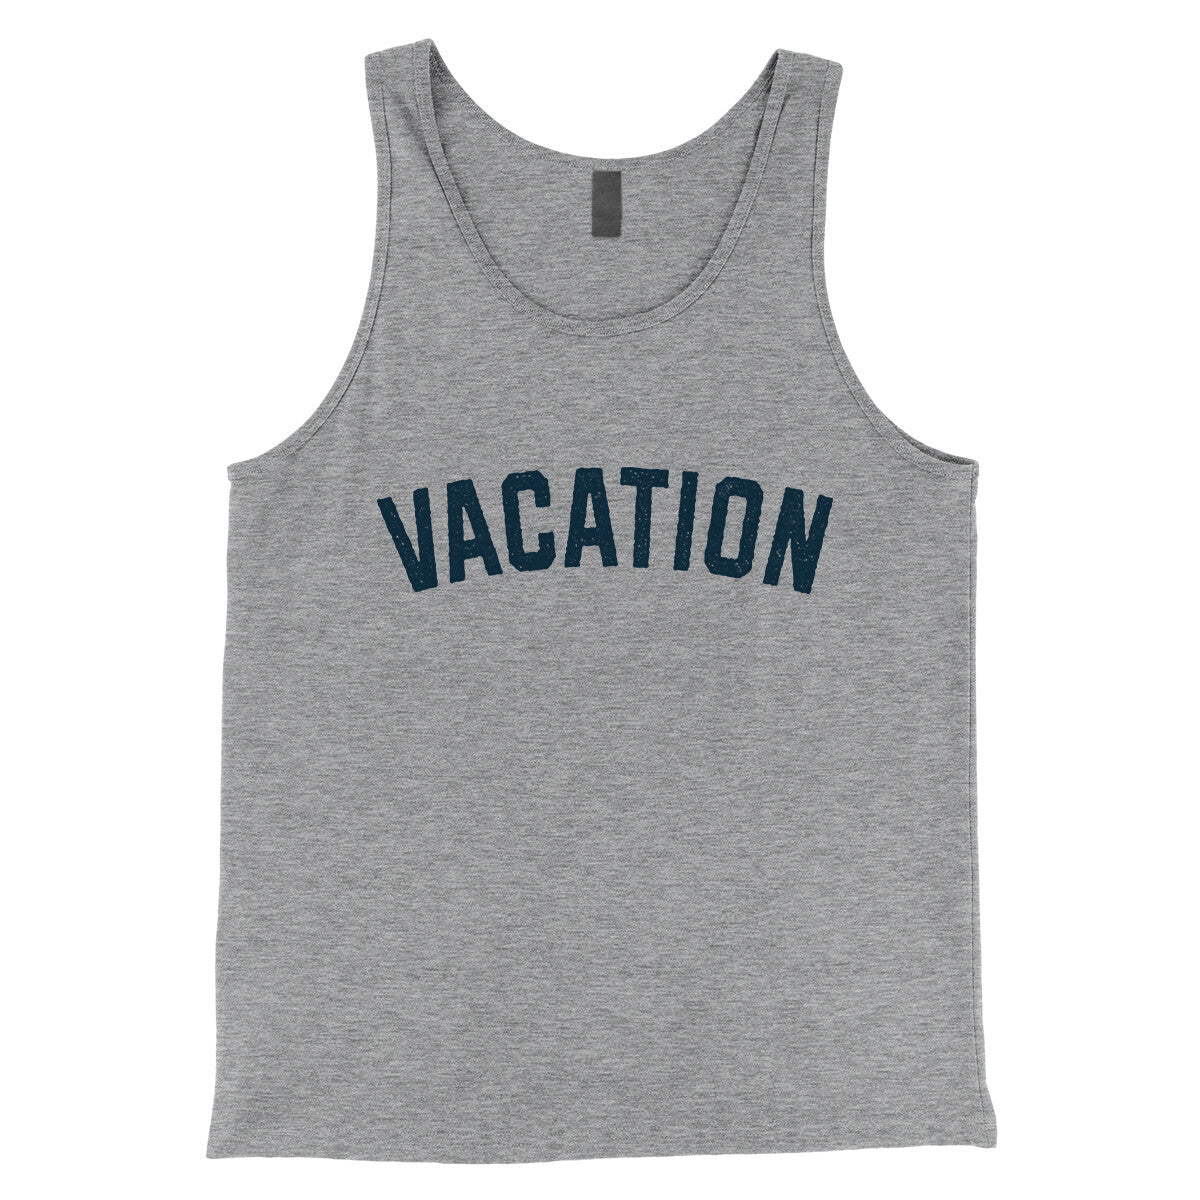 Vacation in Athletic Heather Color